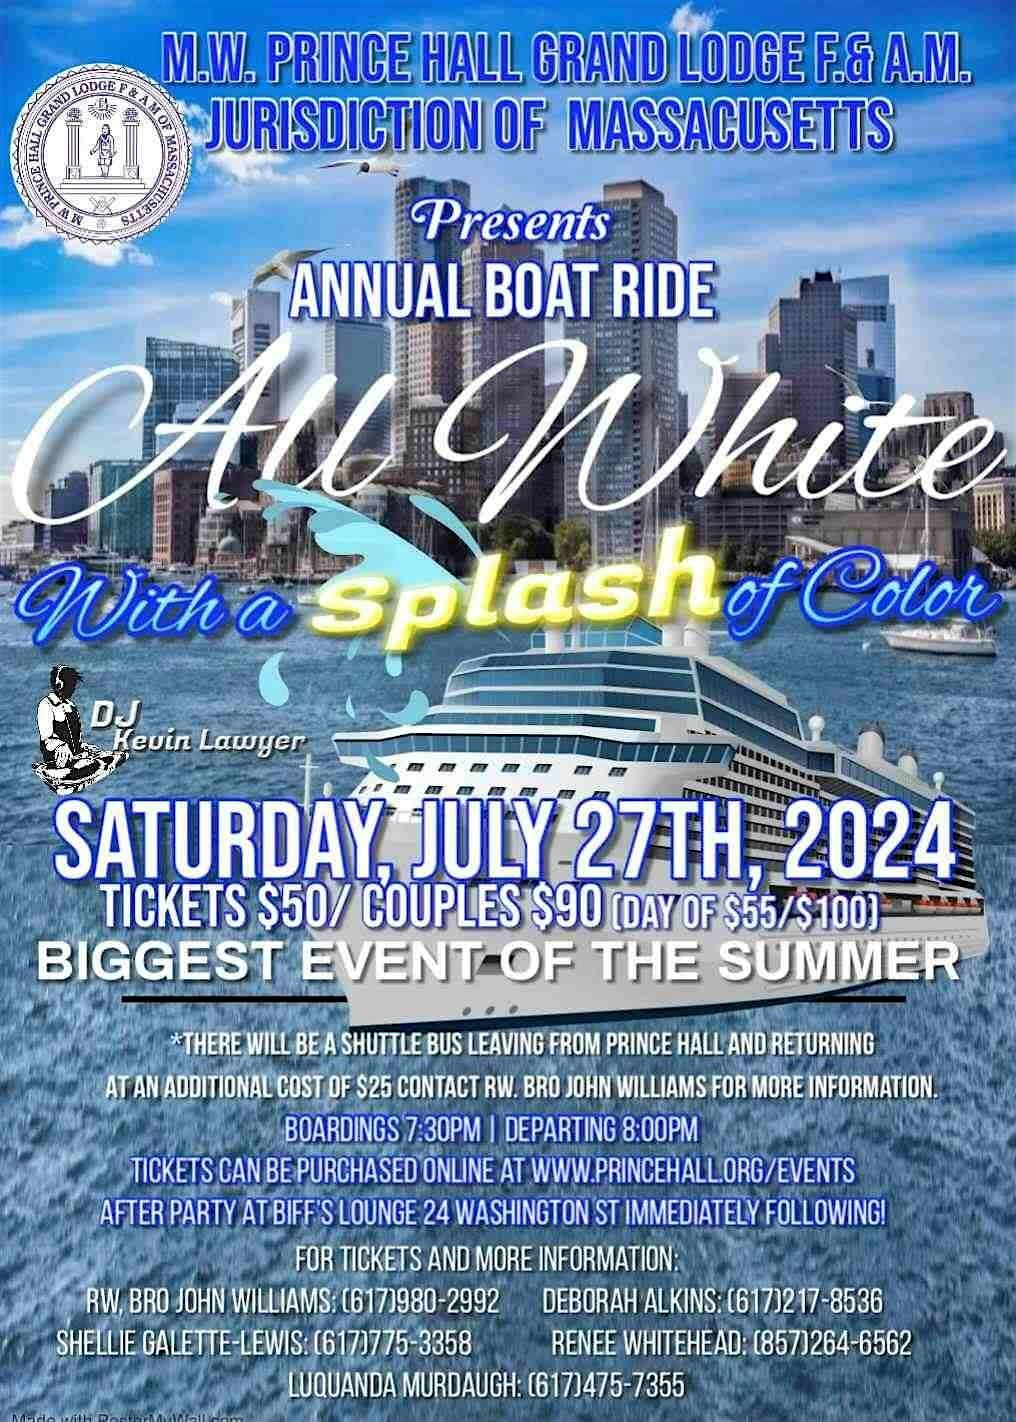 Grand Lodge Annual Boat Ride - All White with a Splash of Color!